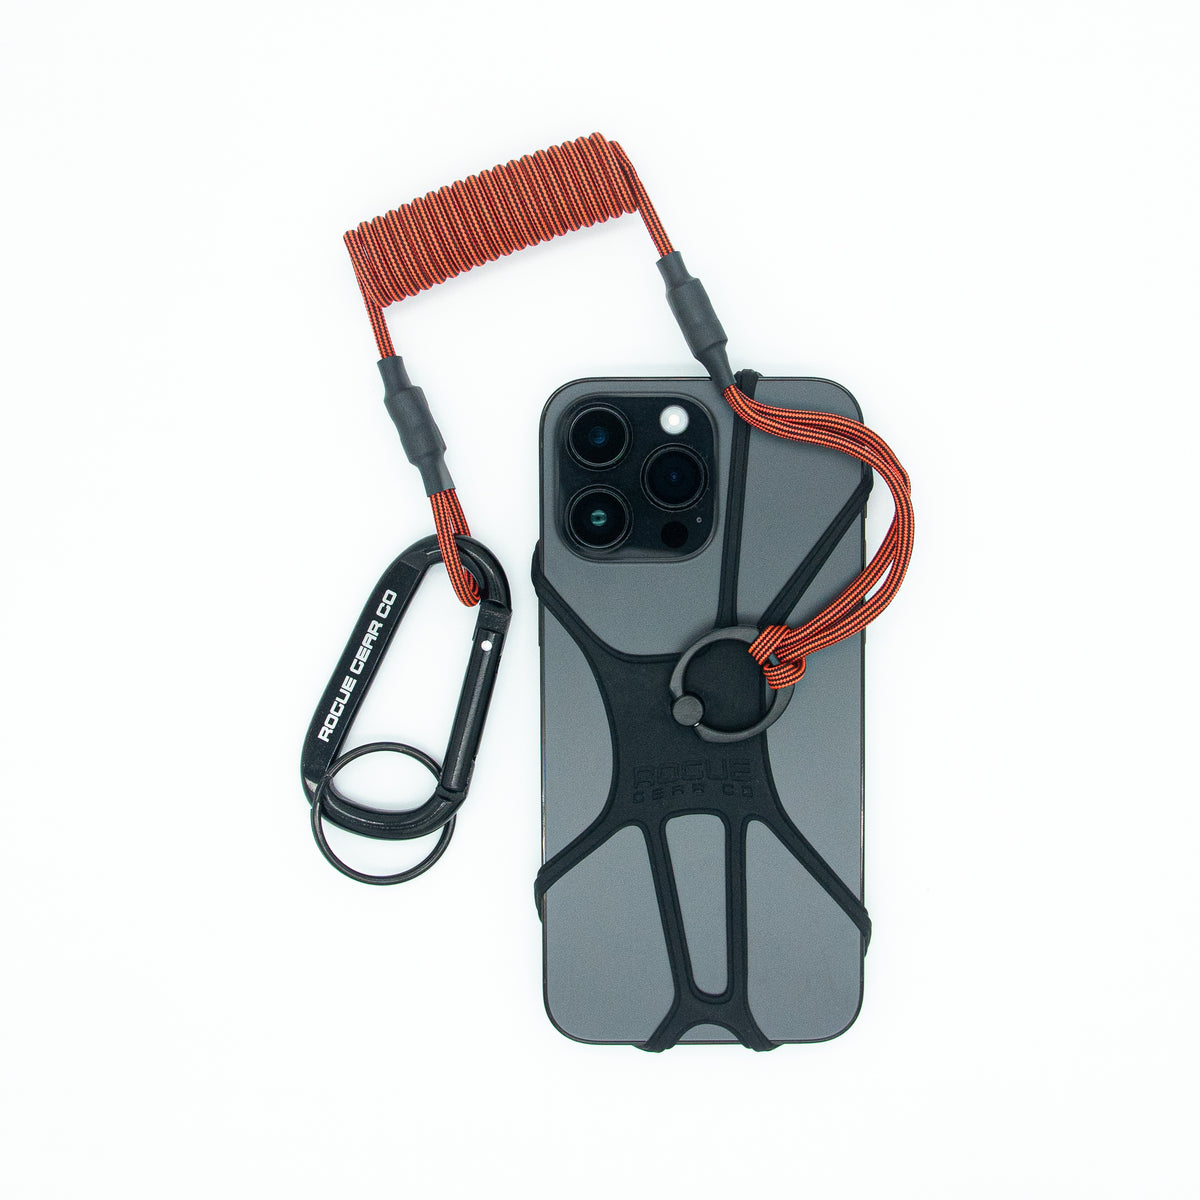 THE PROTECTOR™ Phone Tether XD – Rogue Gear Co.